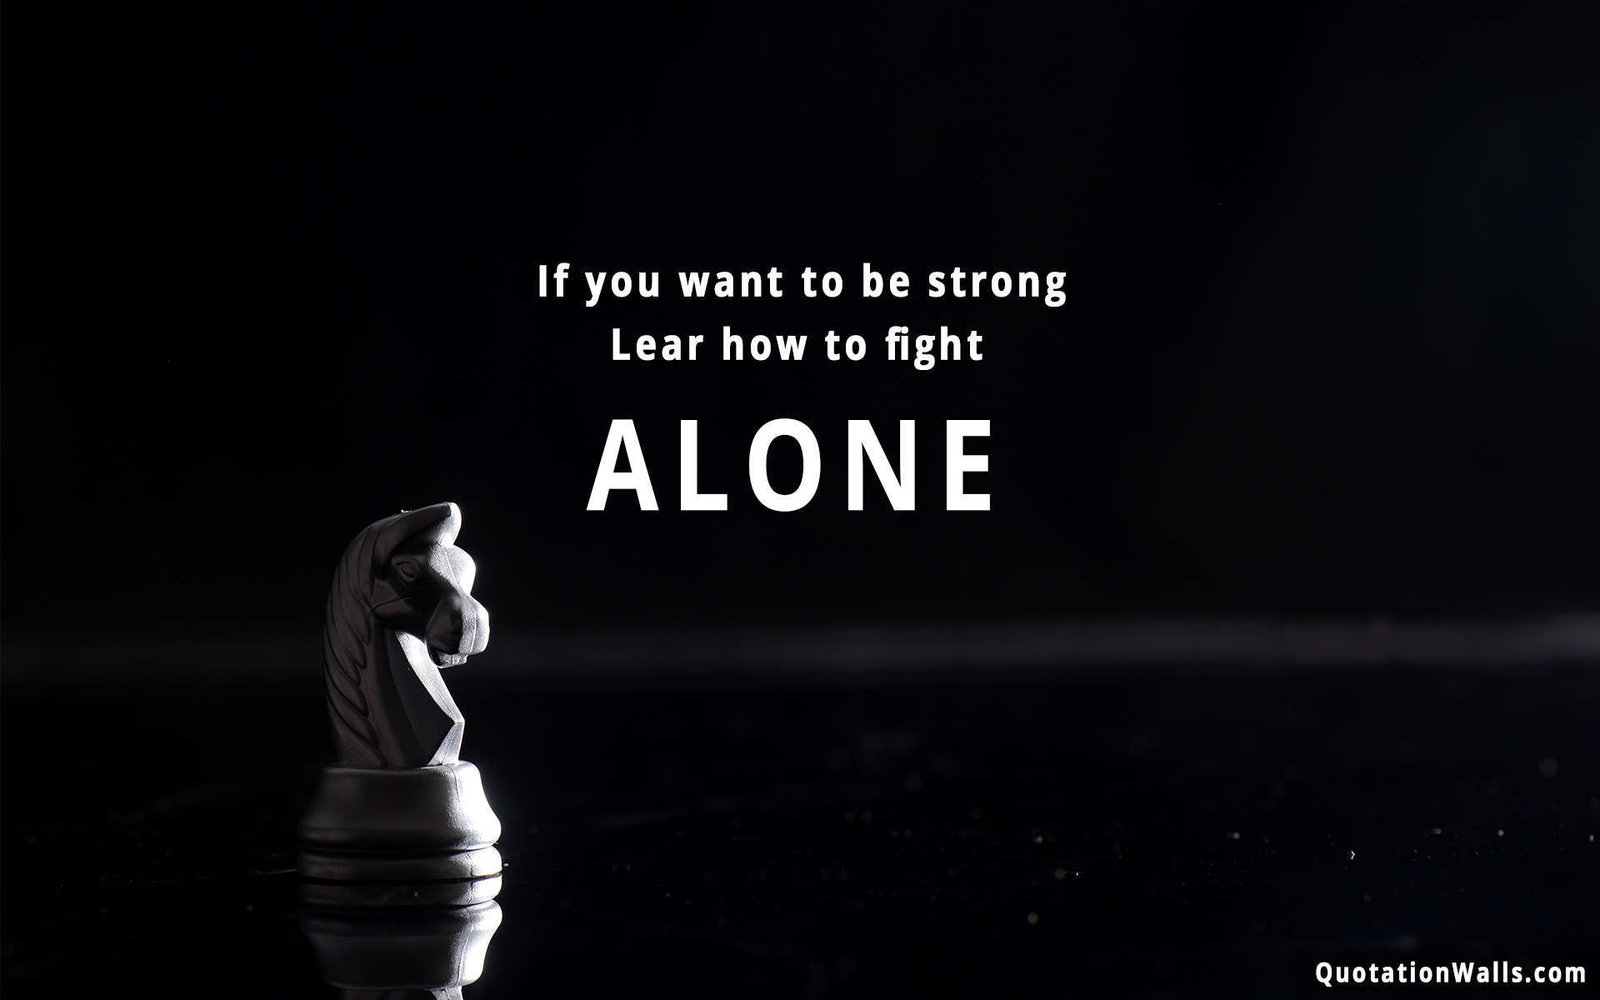 Fight Alone Motivational Wallpaper for